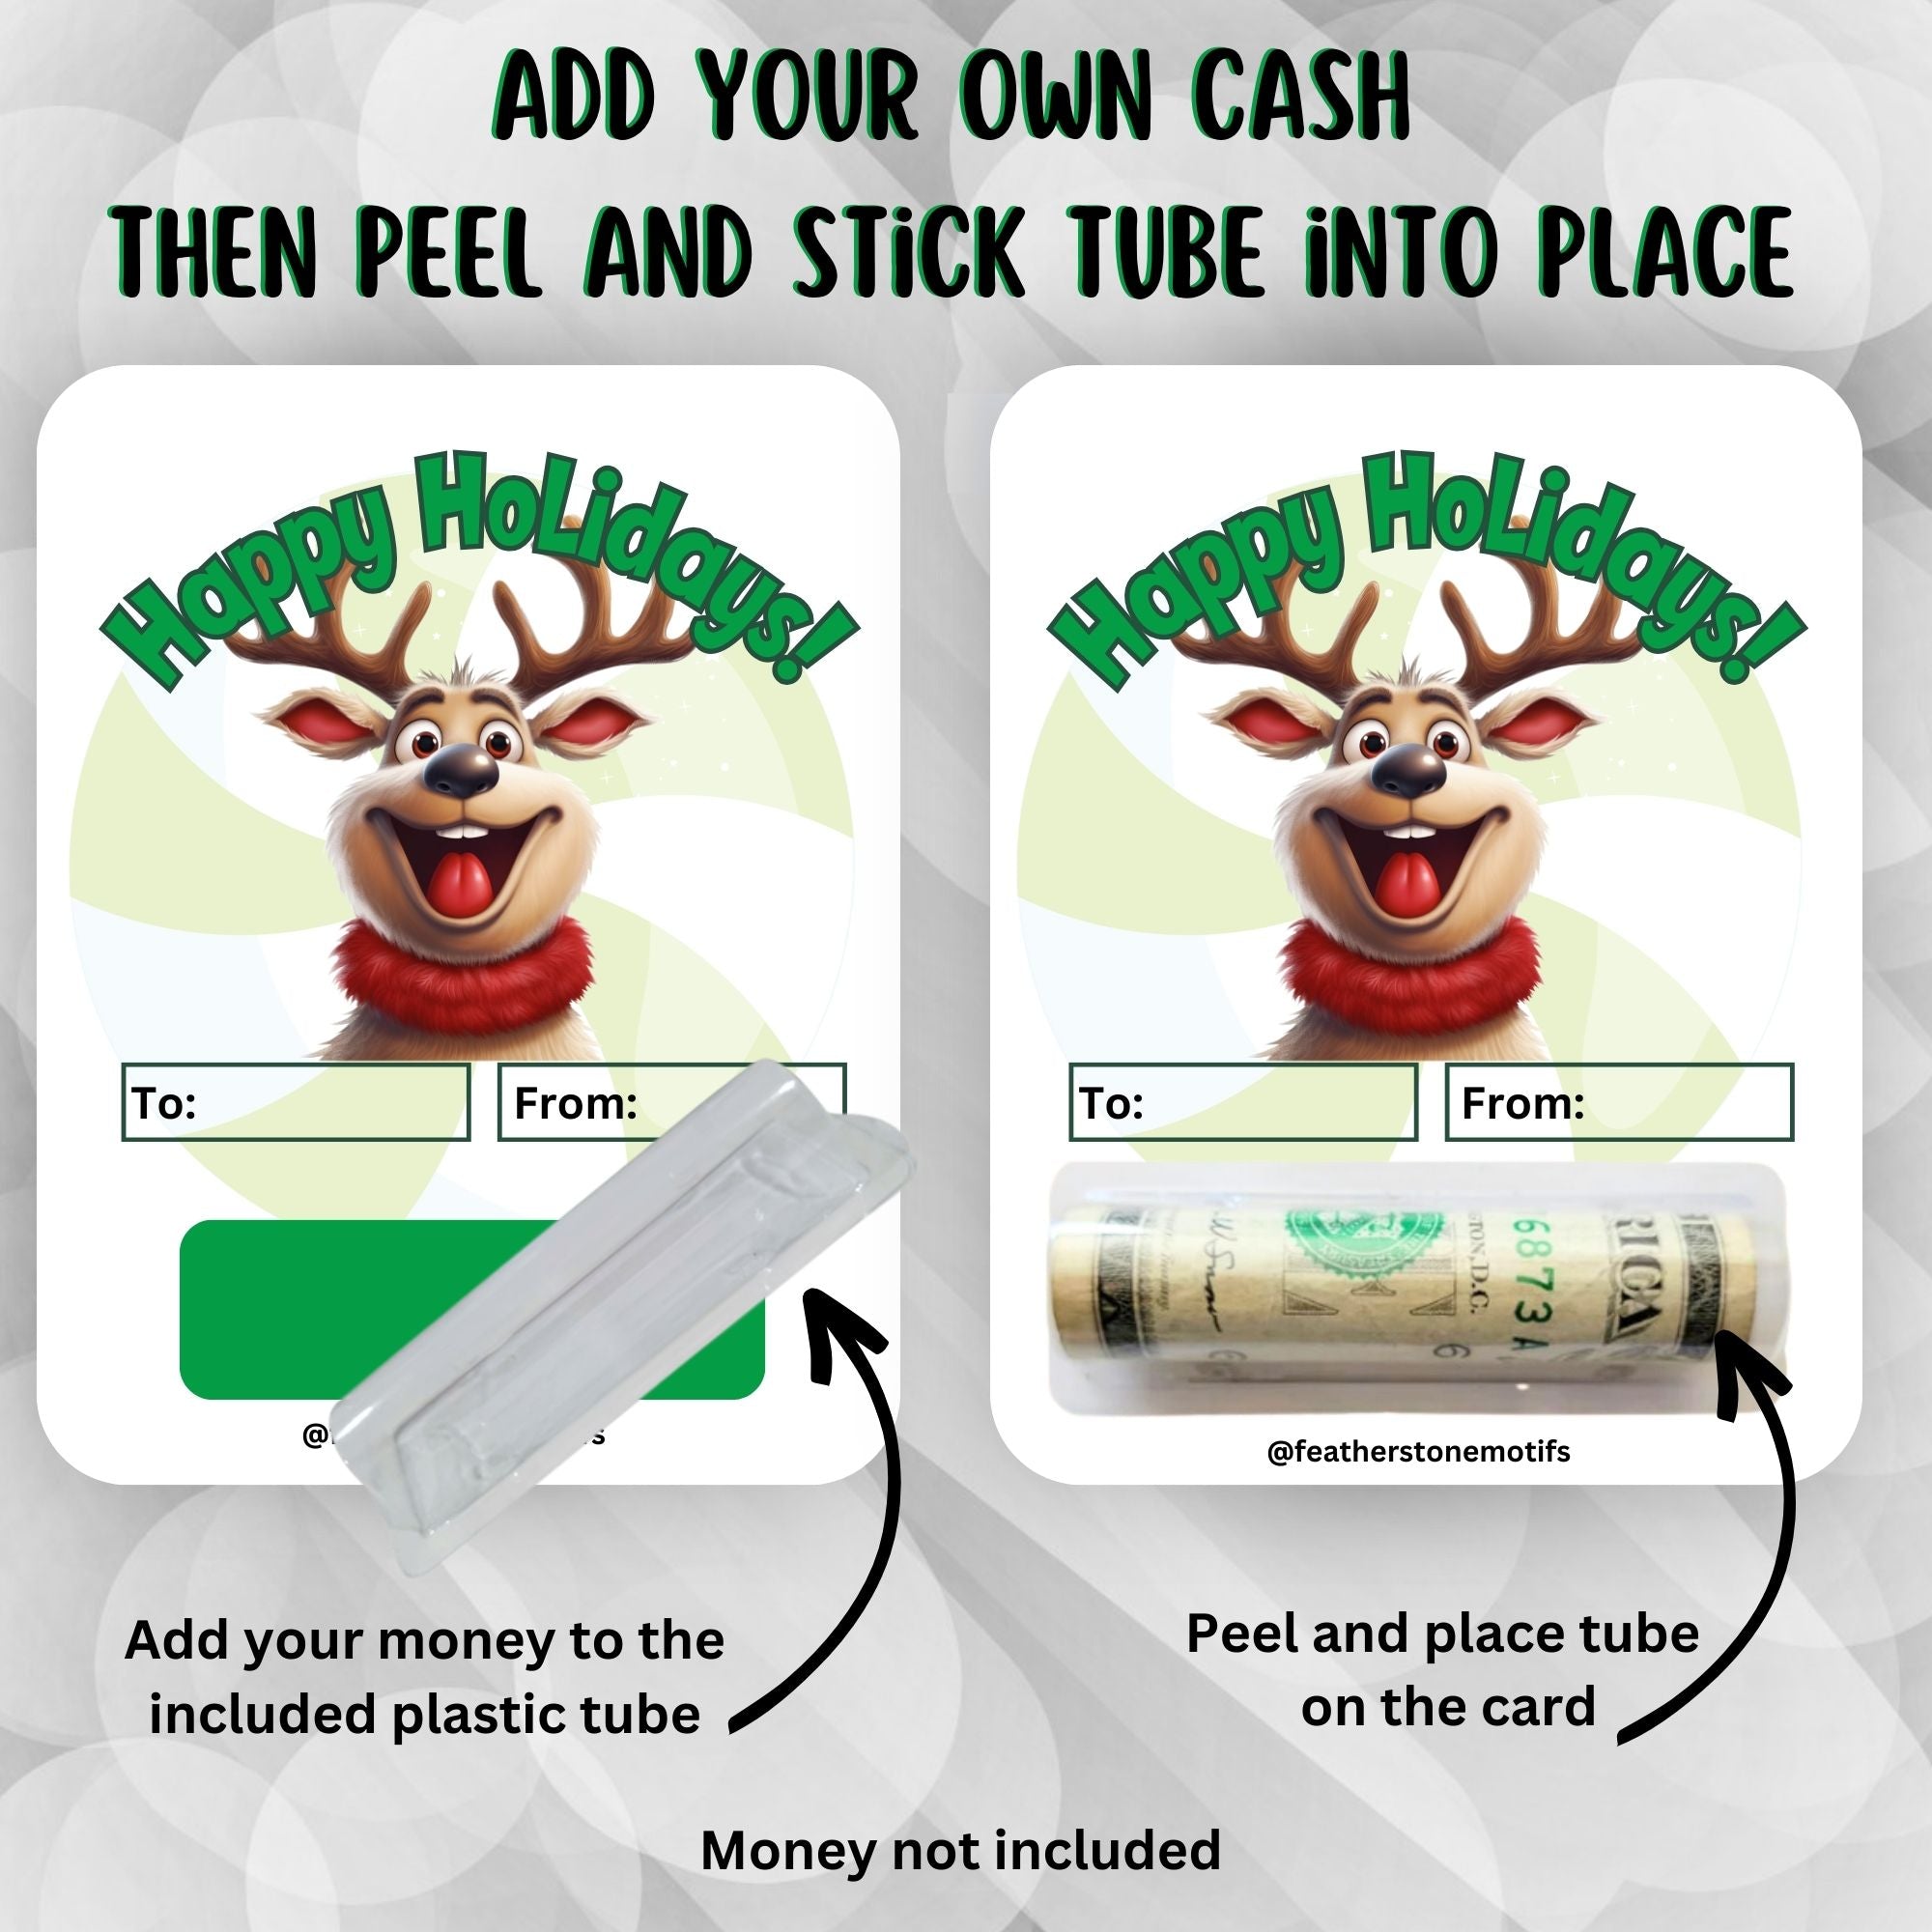 This image shows how to attach the money tube to the Happy Reindeer Money Card.